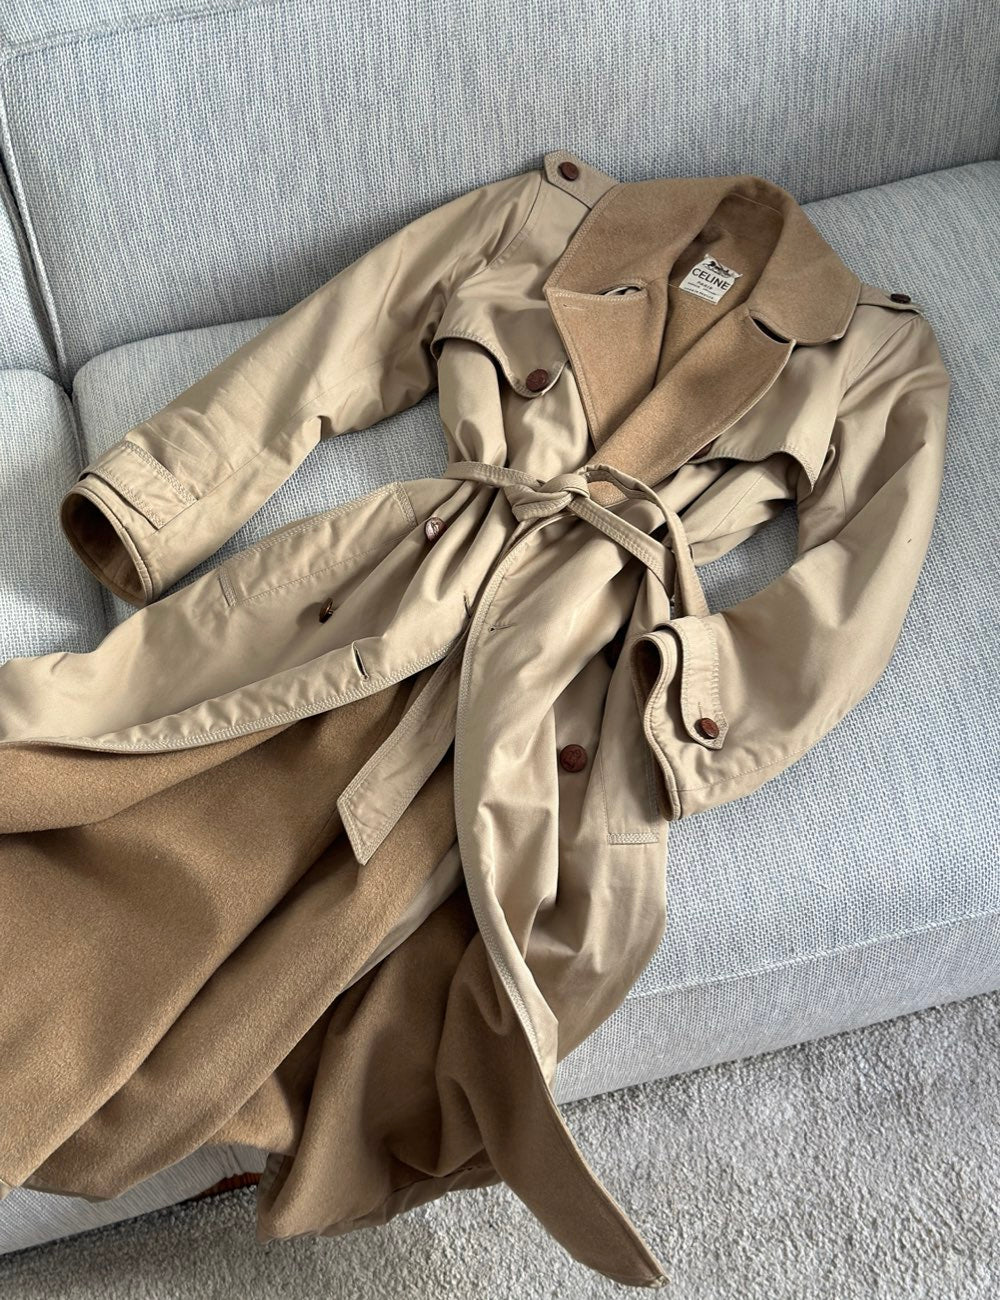 Camel Trench Coat With Interior Lining